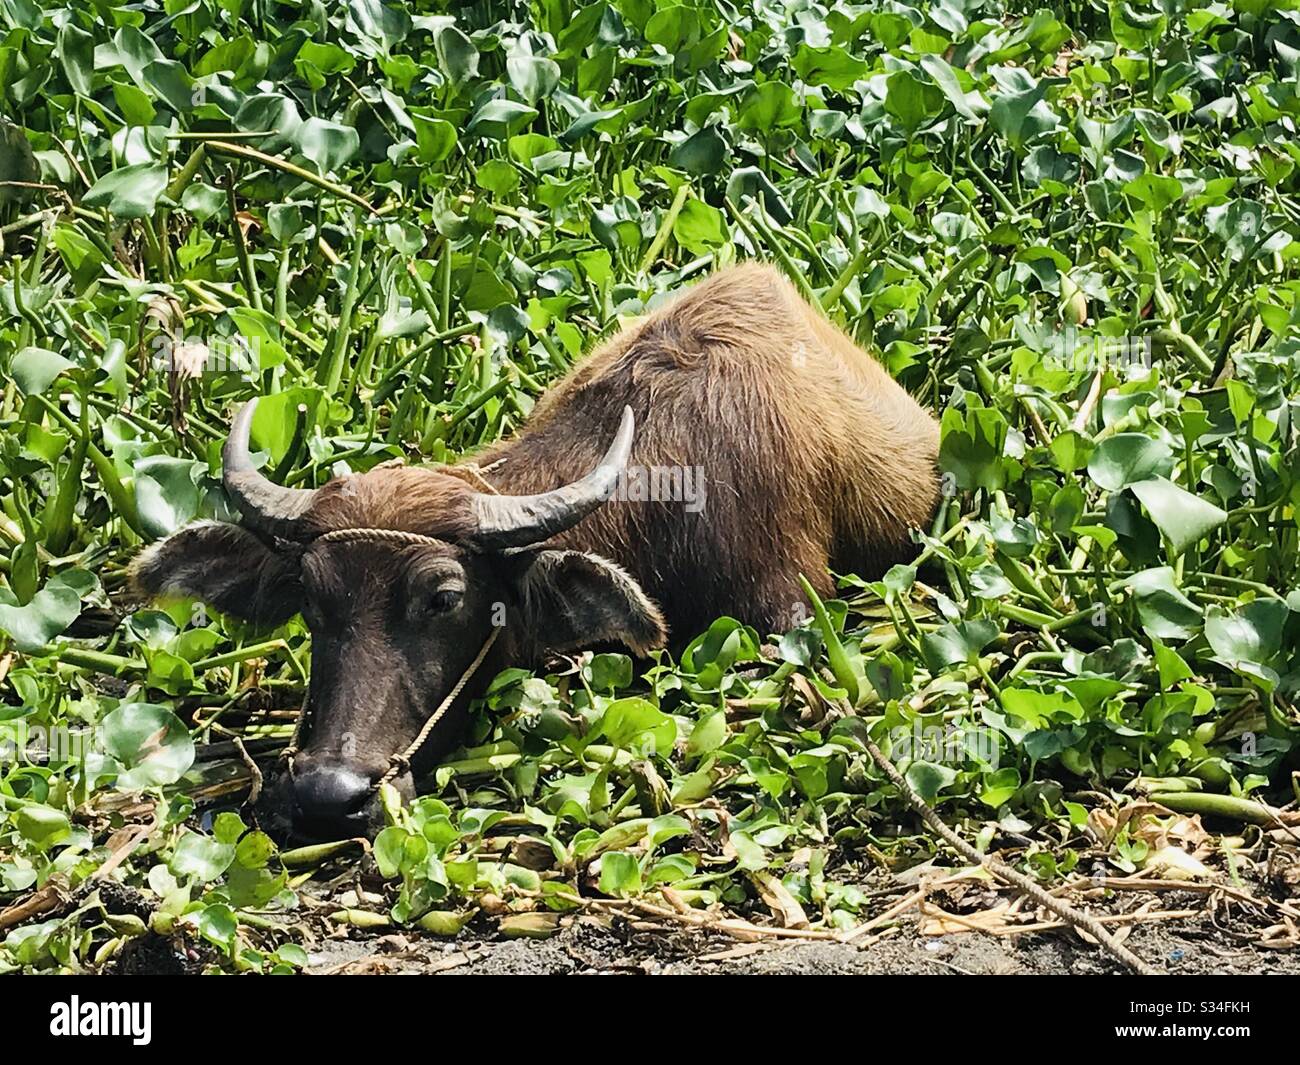 Domestic water buffalo is enjoying his time resting on a bed of greens. A big help for farmers in cultivating the land. Stock Photo